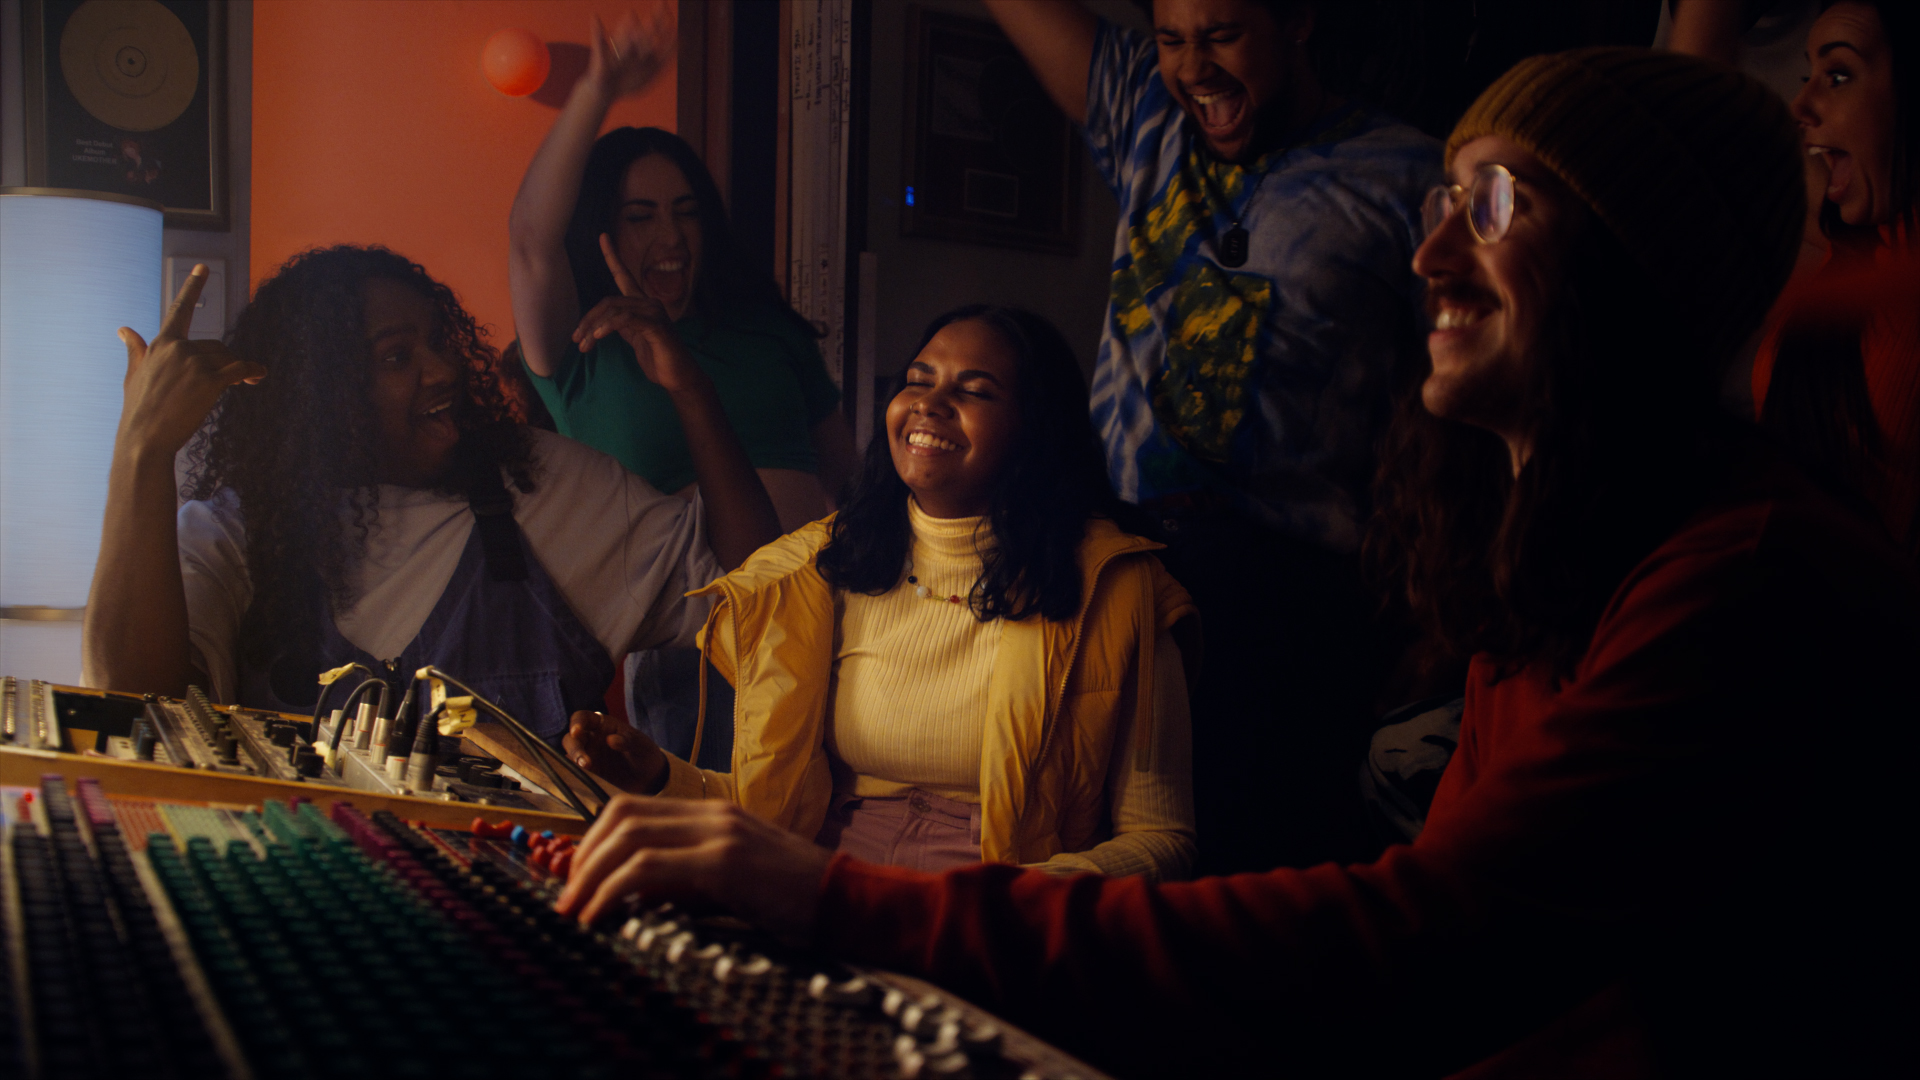 Still from google Helpfulness campaign TVC featuring Baker Boy and a young woman accompanied by happy people in a recording studio